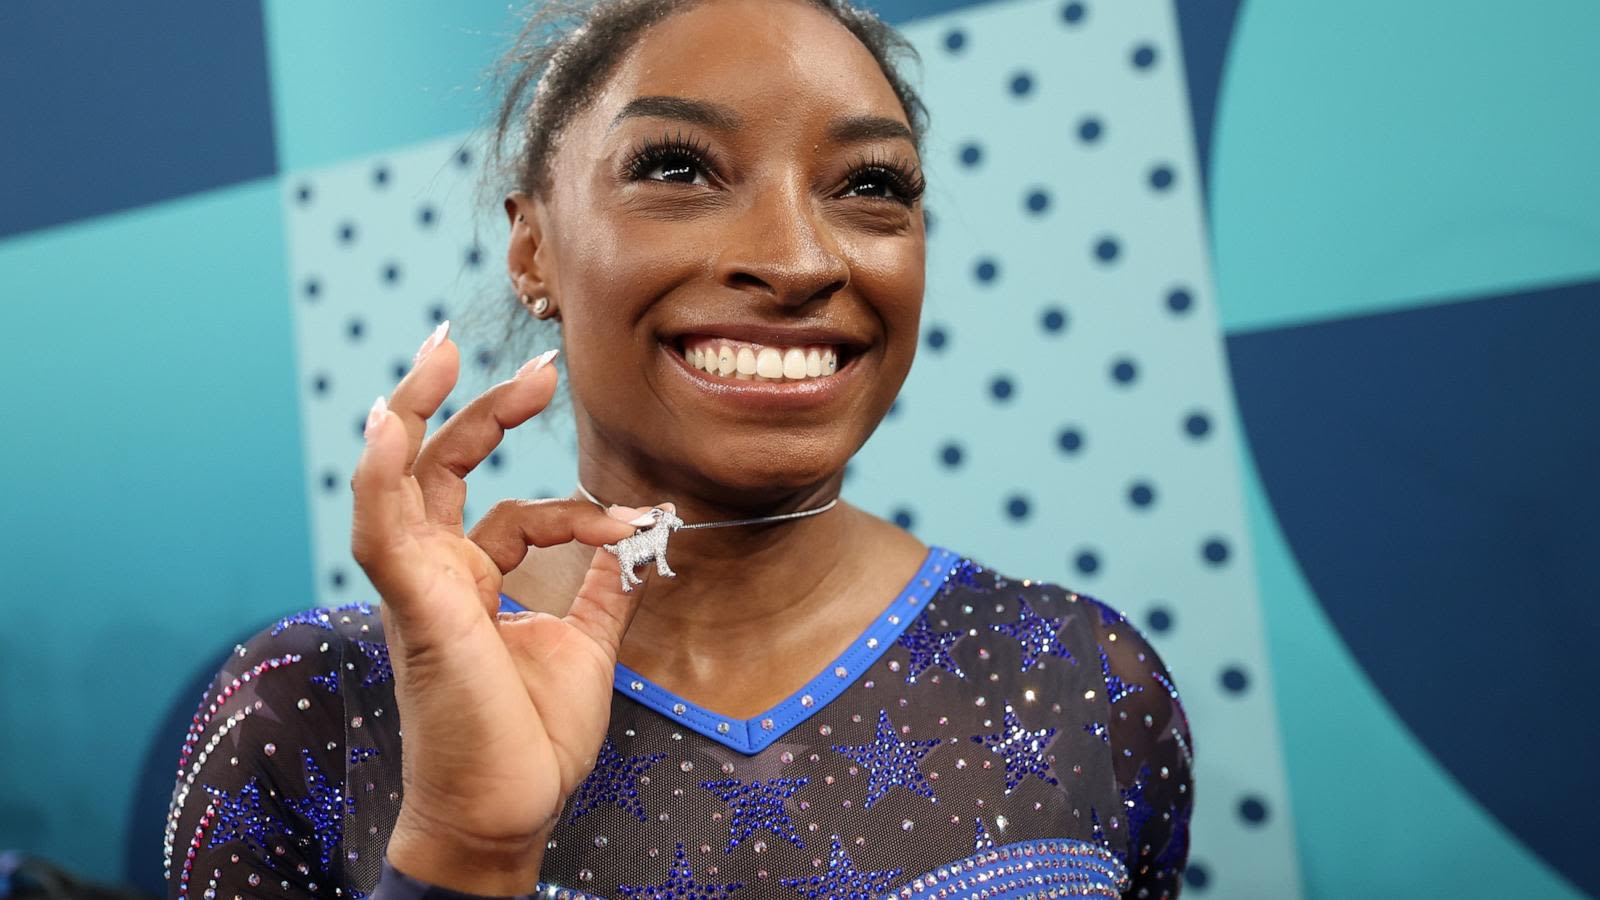 Simone Biles shows off sparkling goat necklace amid historic Olympic gold medal win